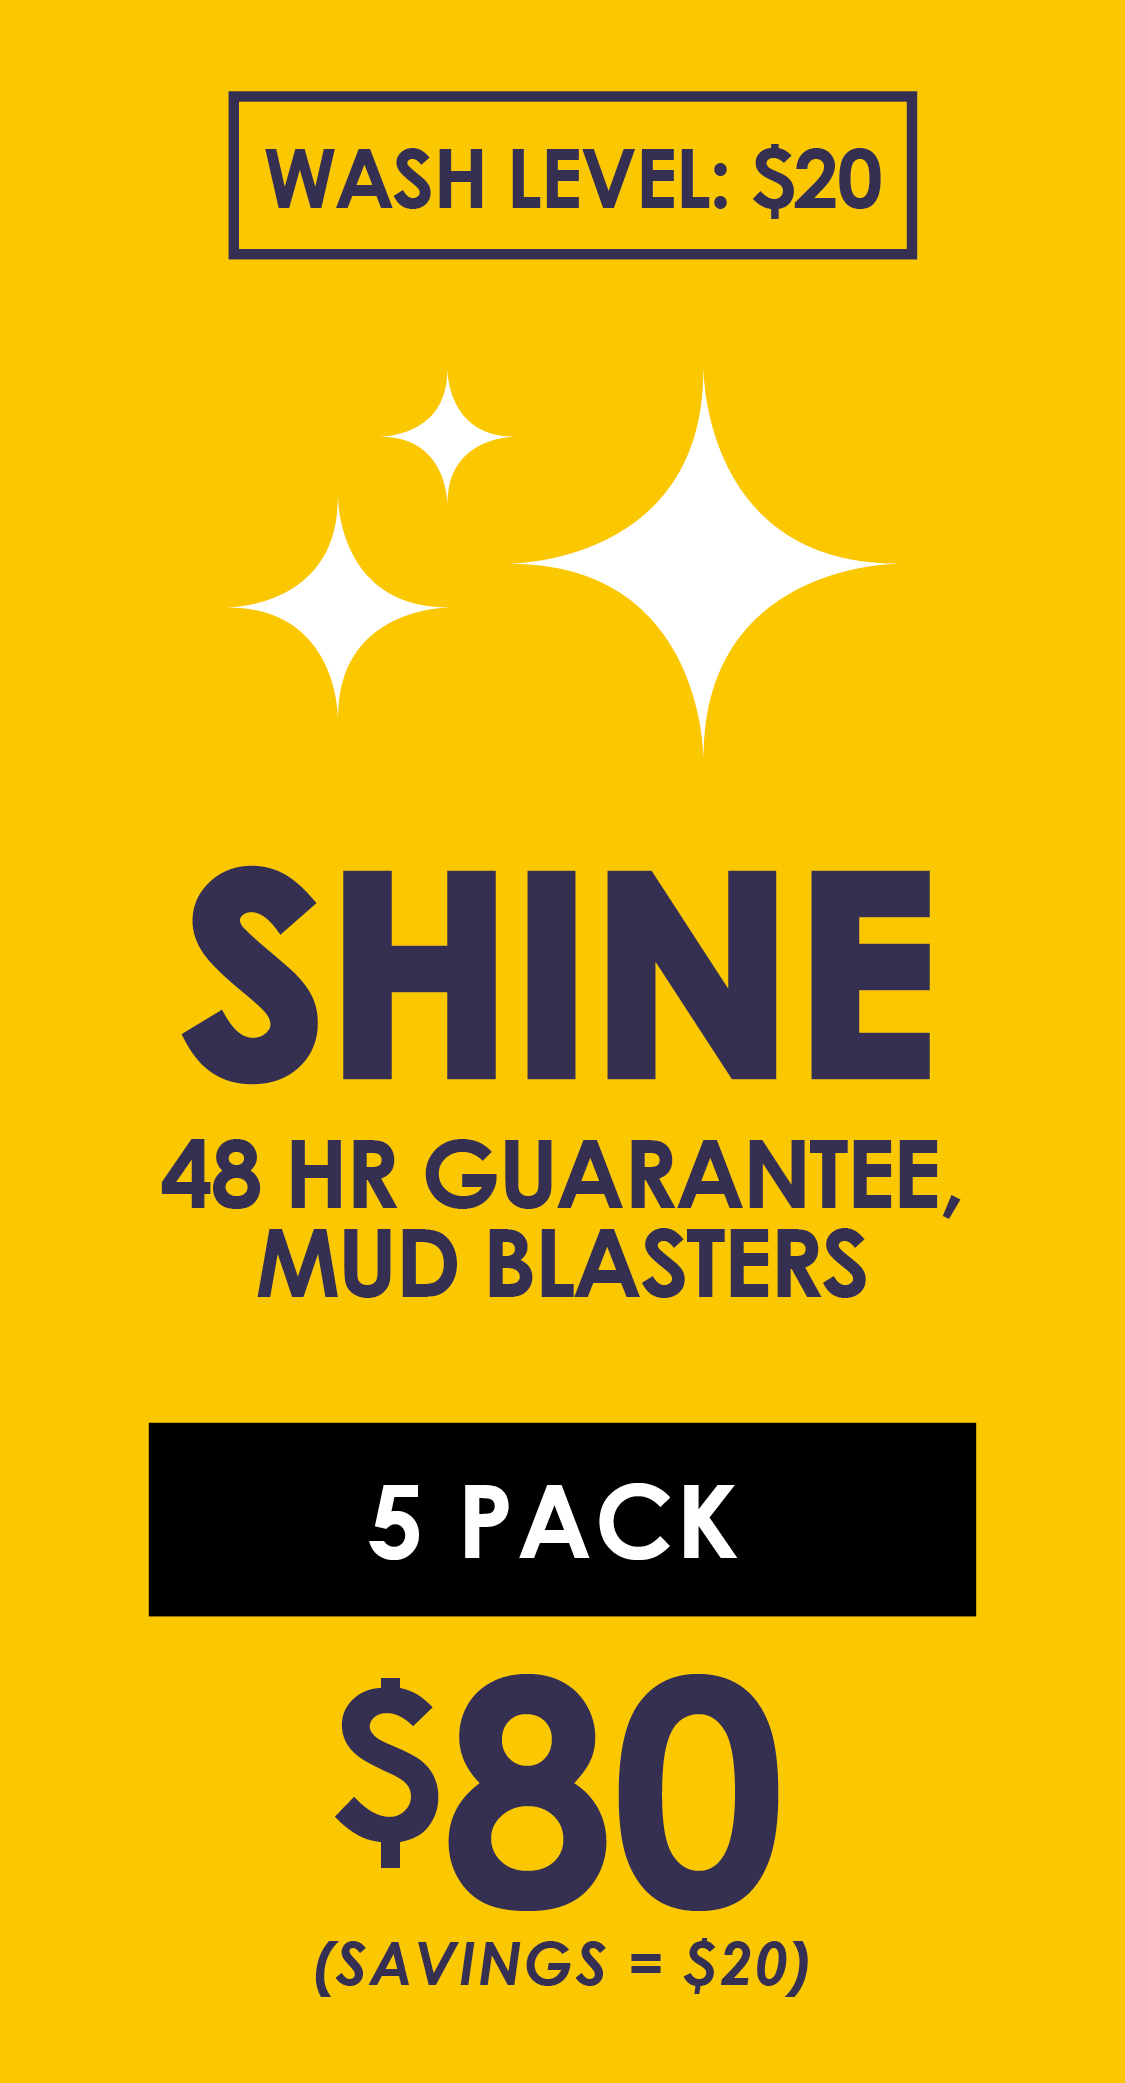 $20, Includes: Hand Prep, Hand-Dry Finish, Bug-Free Guarantee, Free Vacuums, Hand-Dry Door Jambs, Under-body Spray, Rain Repellent, Hot Wax, Rim Cleaner, Tire Shine, Total Body Protectant, Mud Blasters, 48-Hour Clean-Car Guarantee